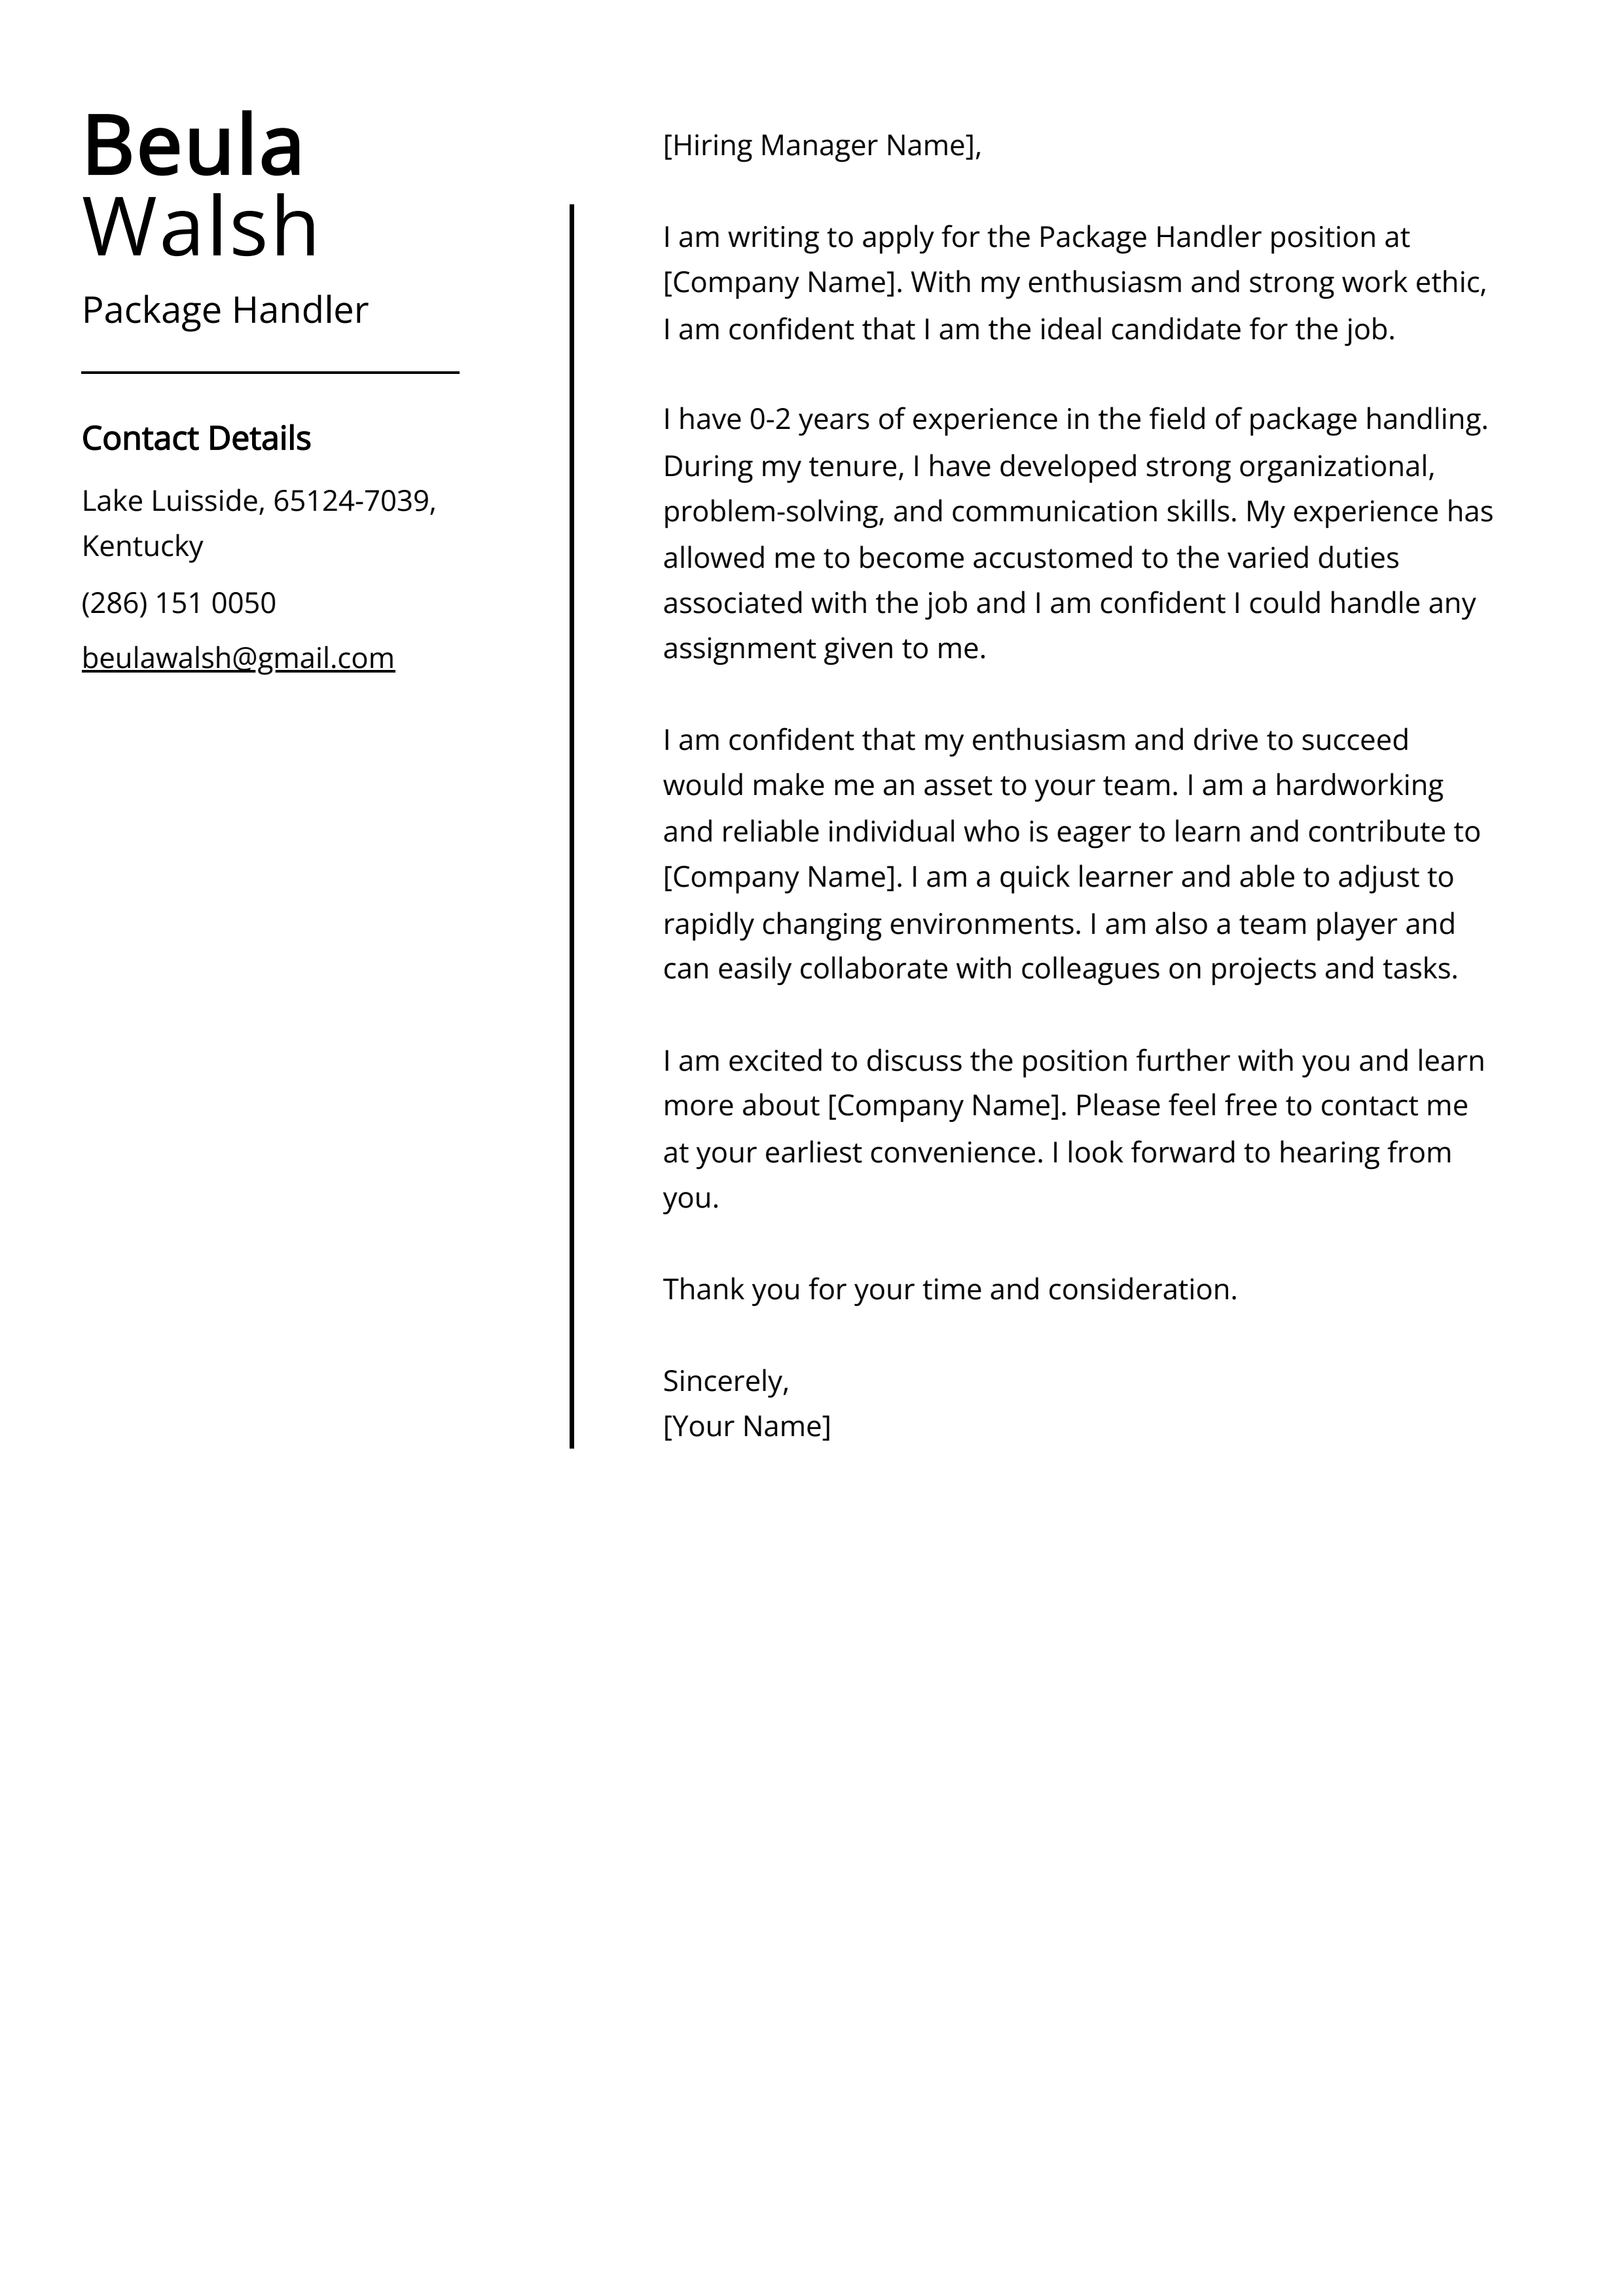 Package Handler Cover Letter Example